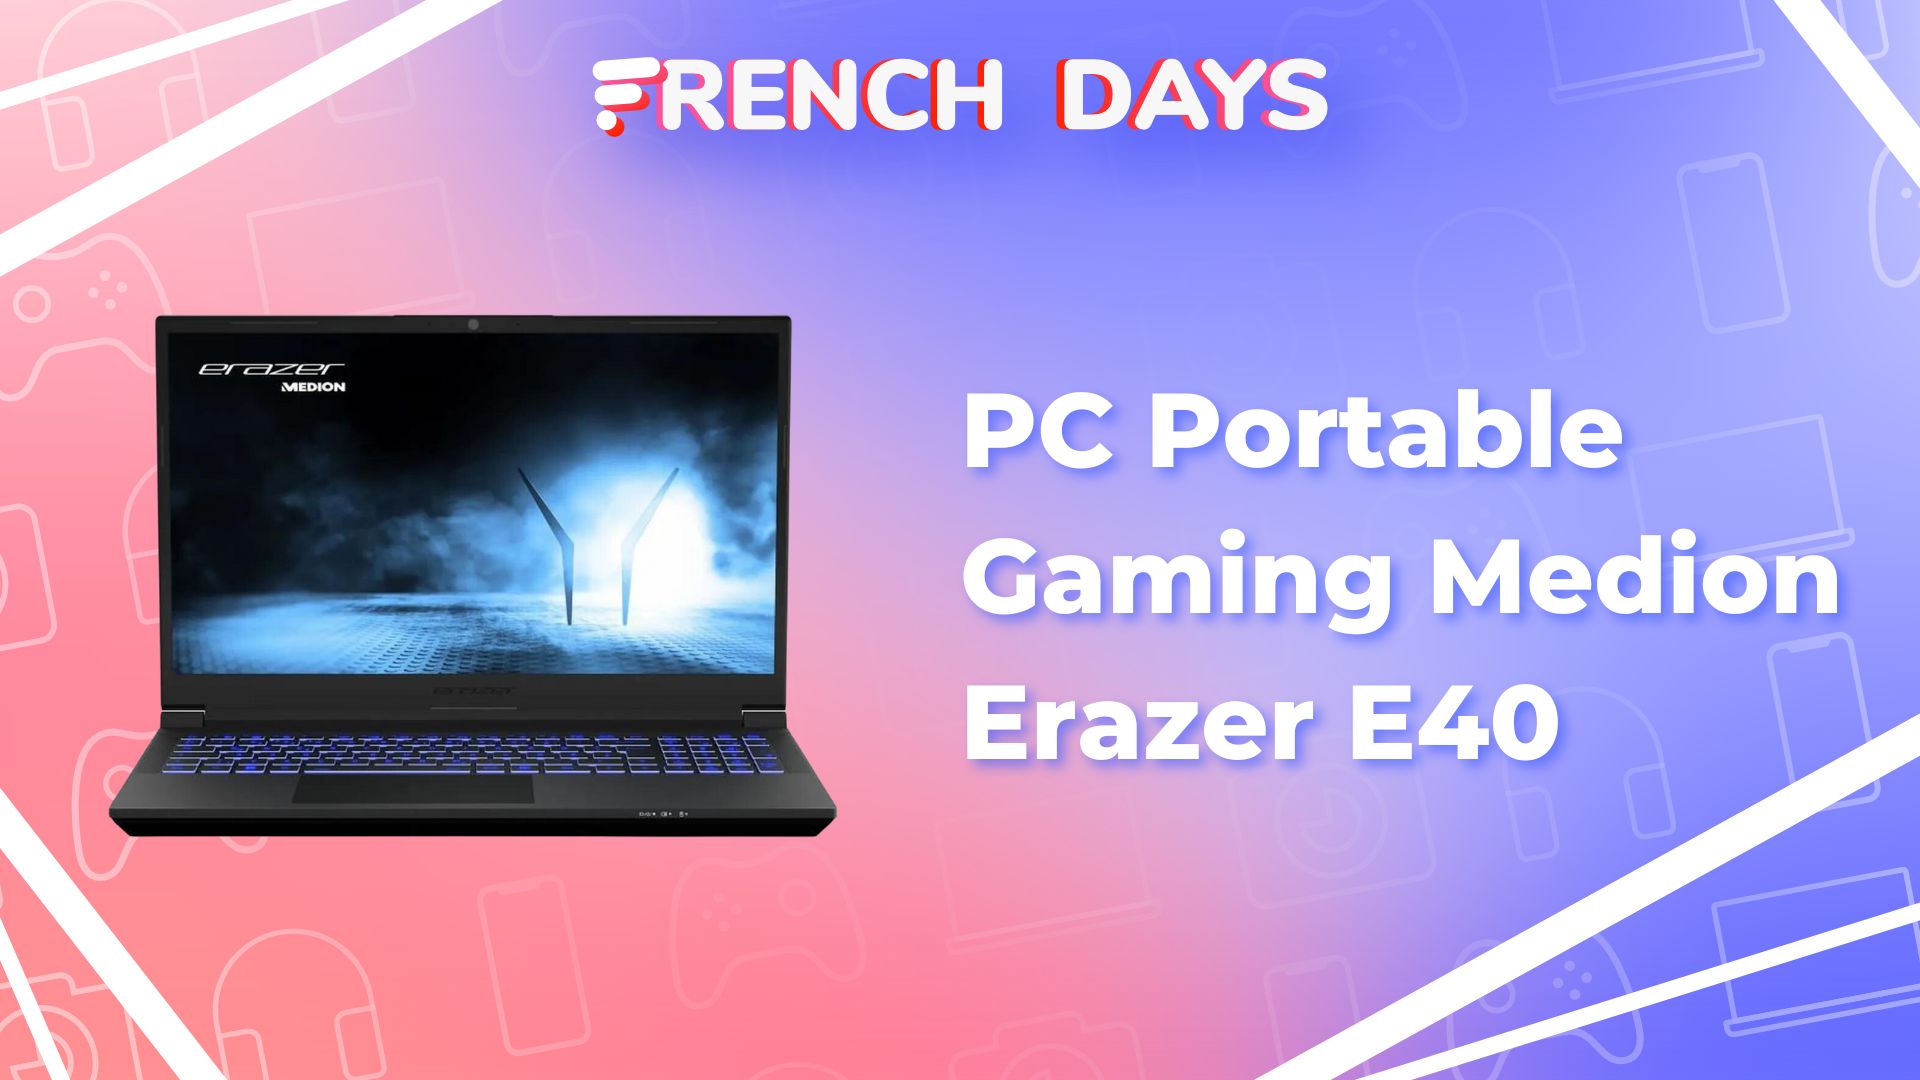 https://images.frandroid.com/wp-content/uploads/2023/05/french-days-pc-portable-gaming-medion-erazer-e40.jpg